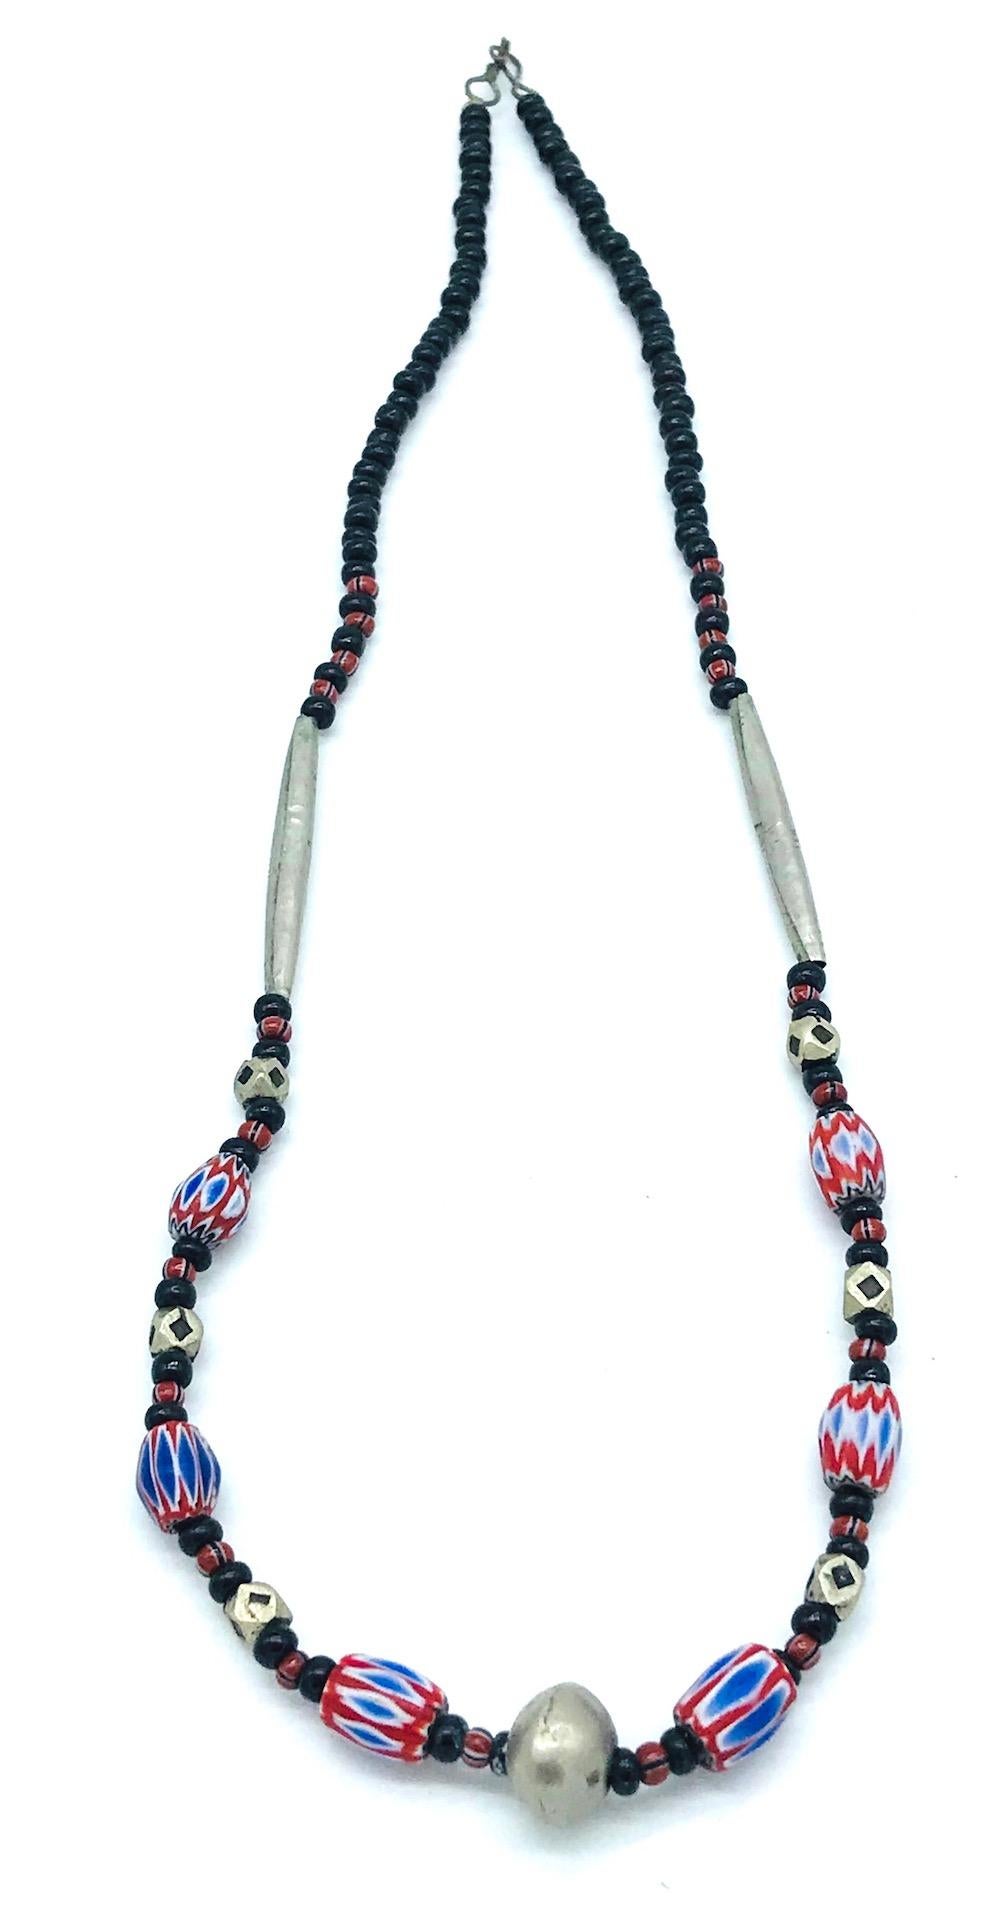  Mali Africa, Hand Red-White Blue painted Bead Necklace 19 
estate purchased from Bamako Mali, Africa and is no longer available to travel today for goods